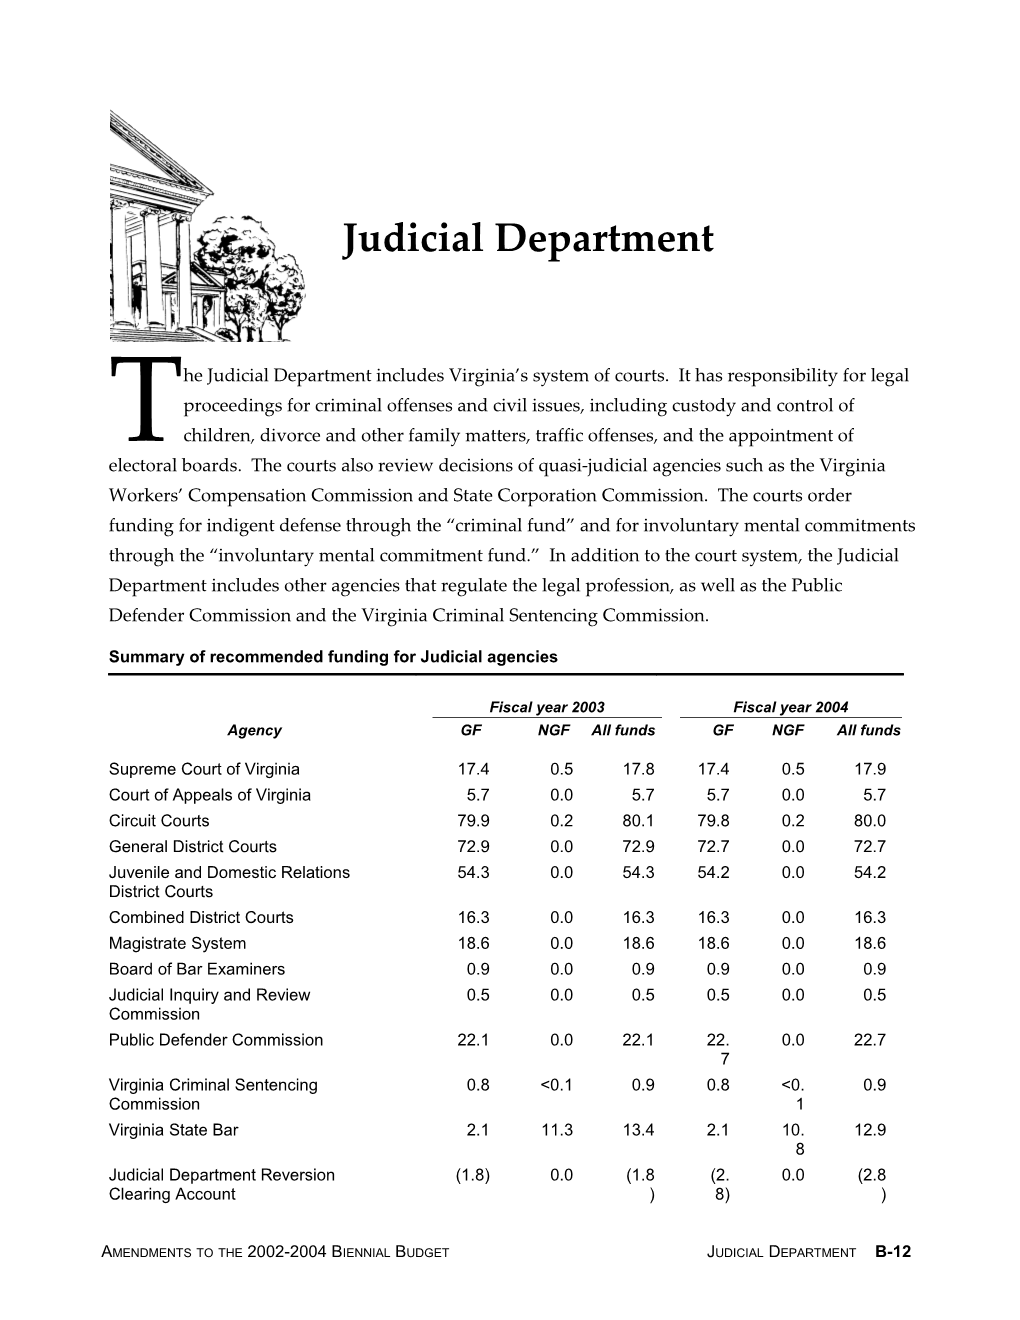 Summary of Recommended Funding for Judicial Agencies